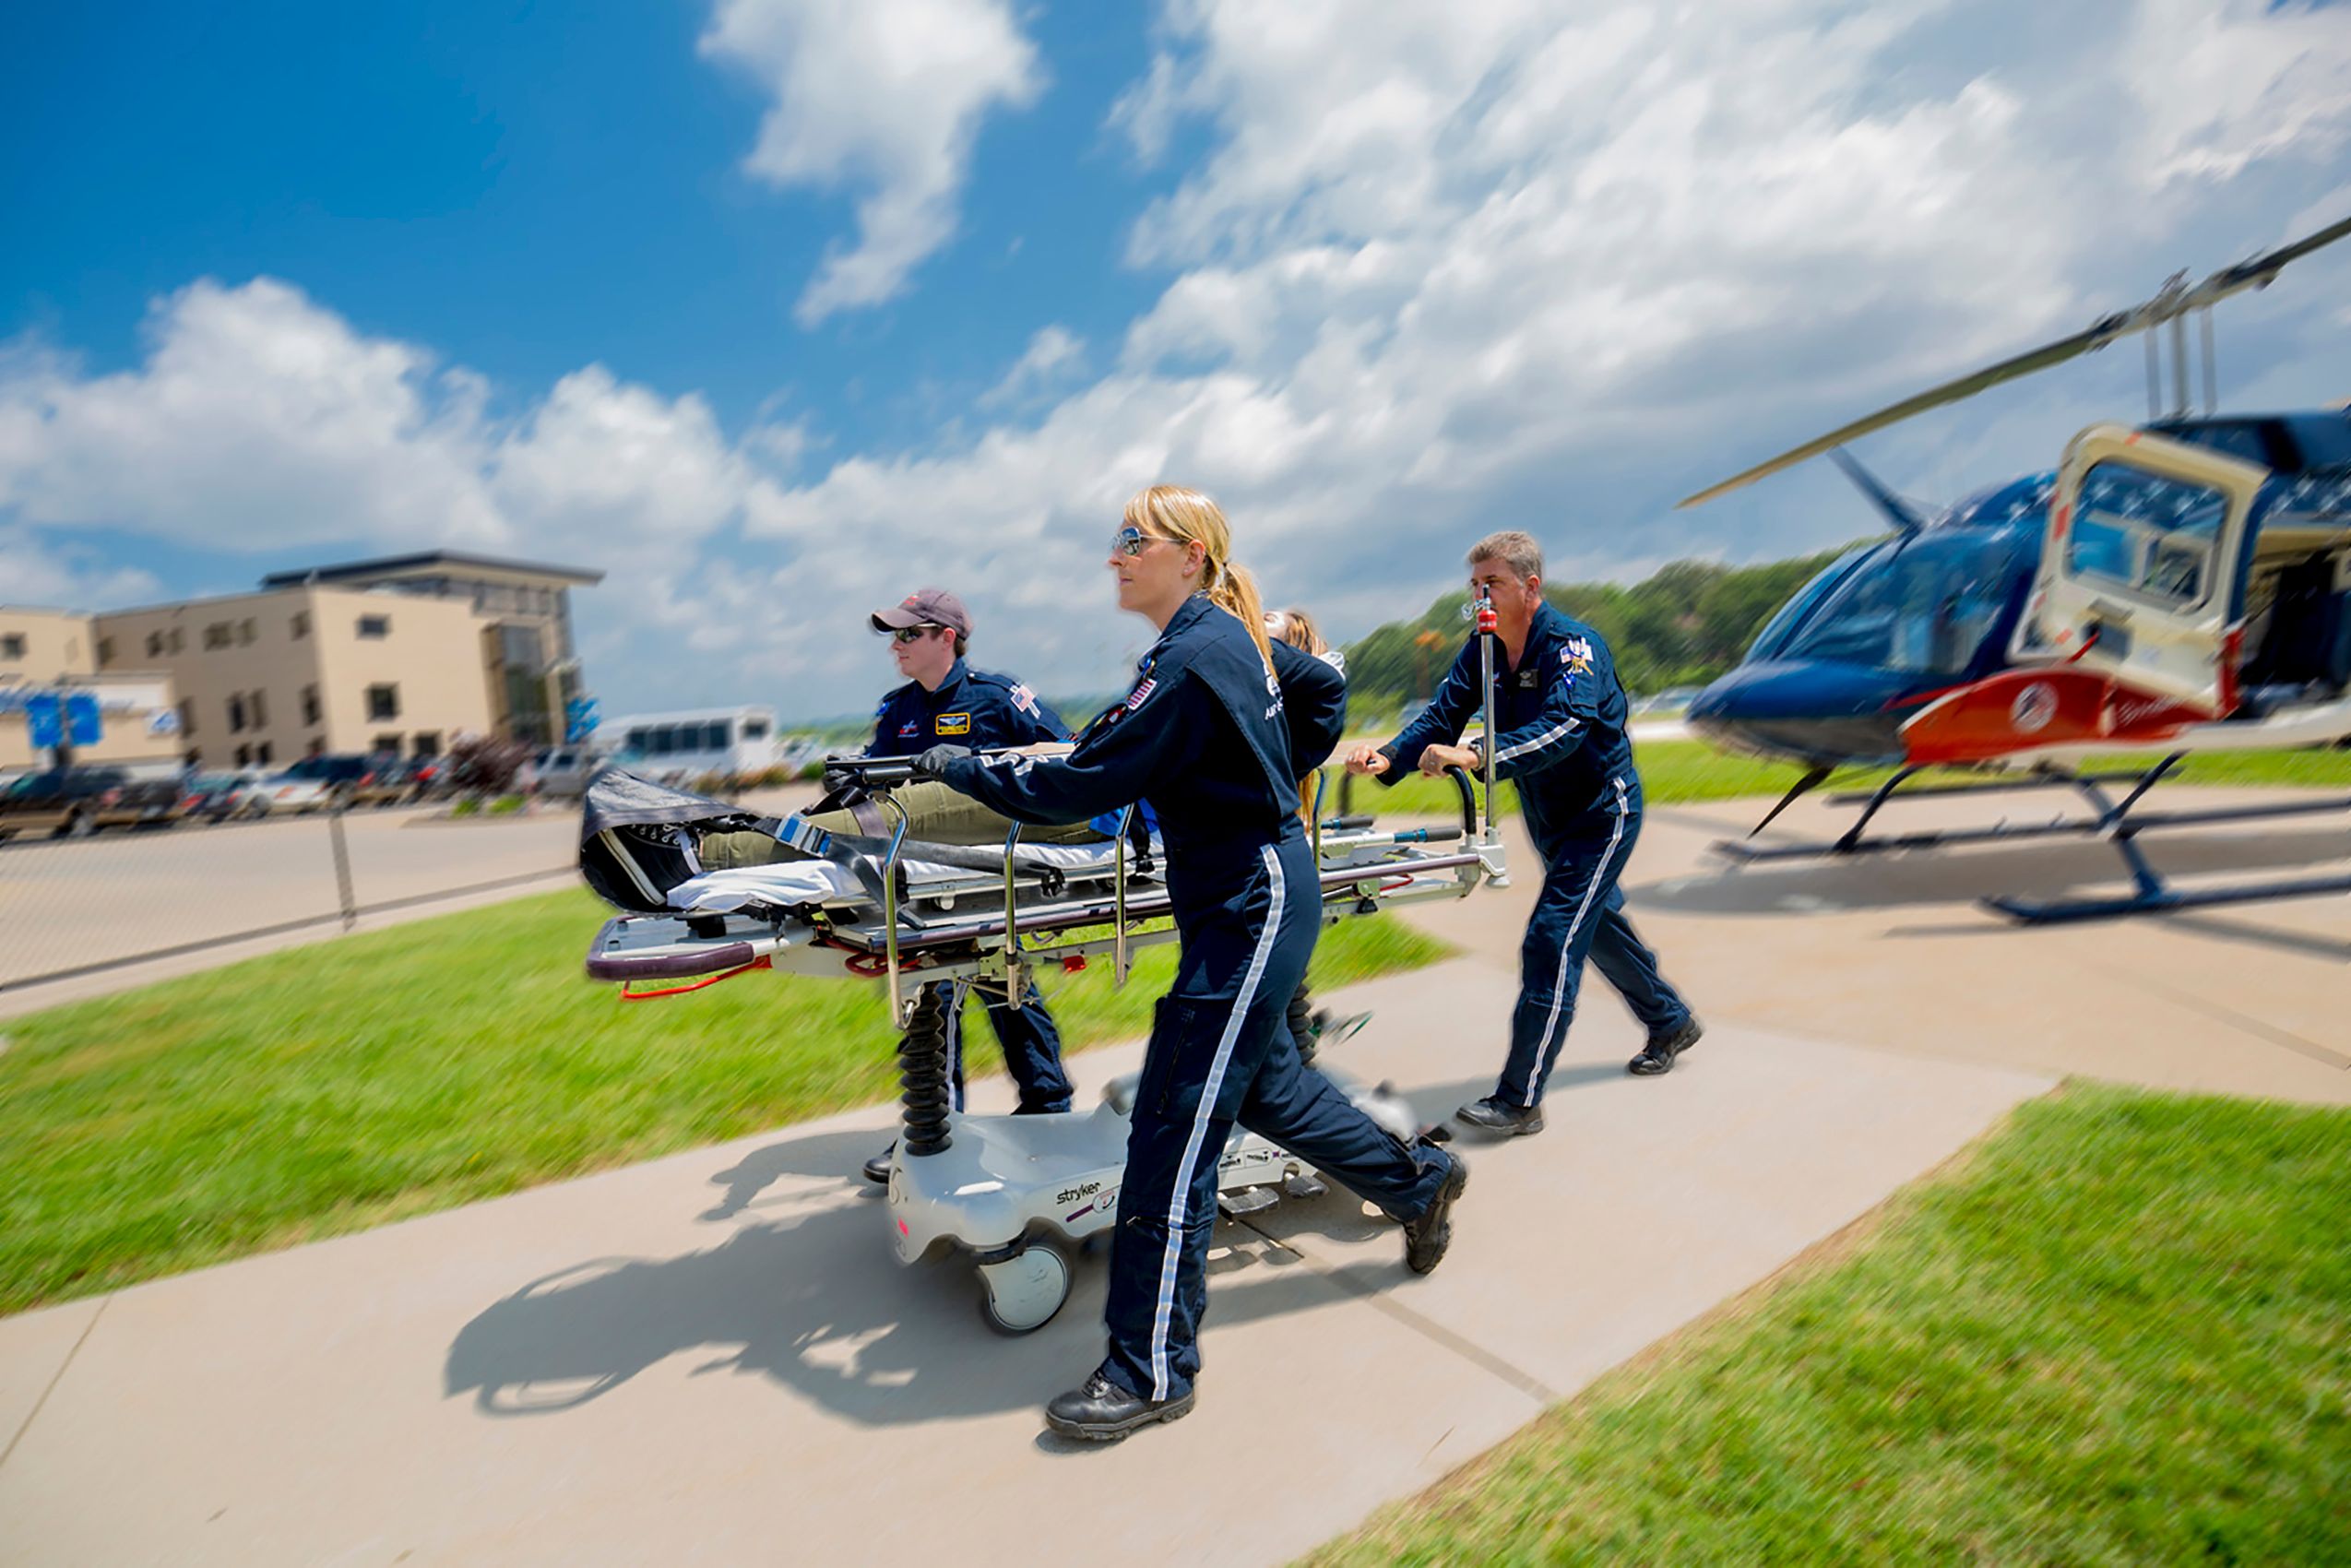 Helicopter_medical_ARP1401_F_W.jpg